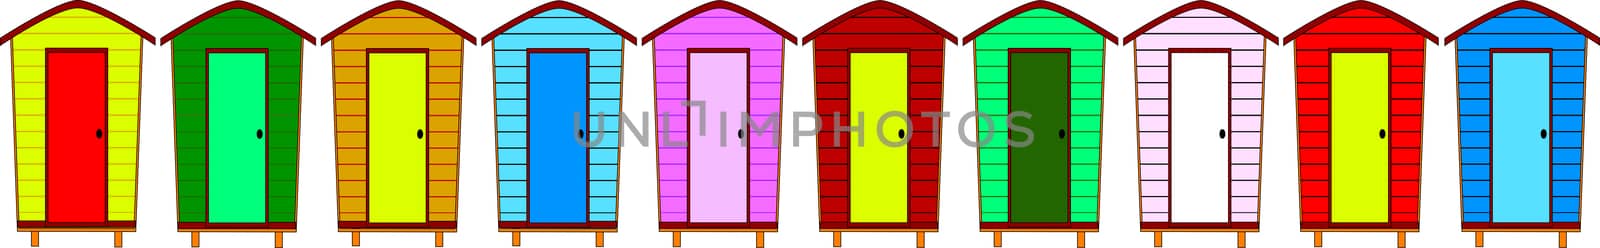 Ten beach huts, no gradients, with copy space and separately grouped.